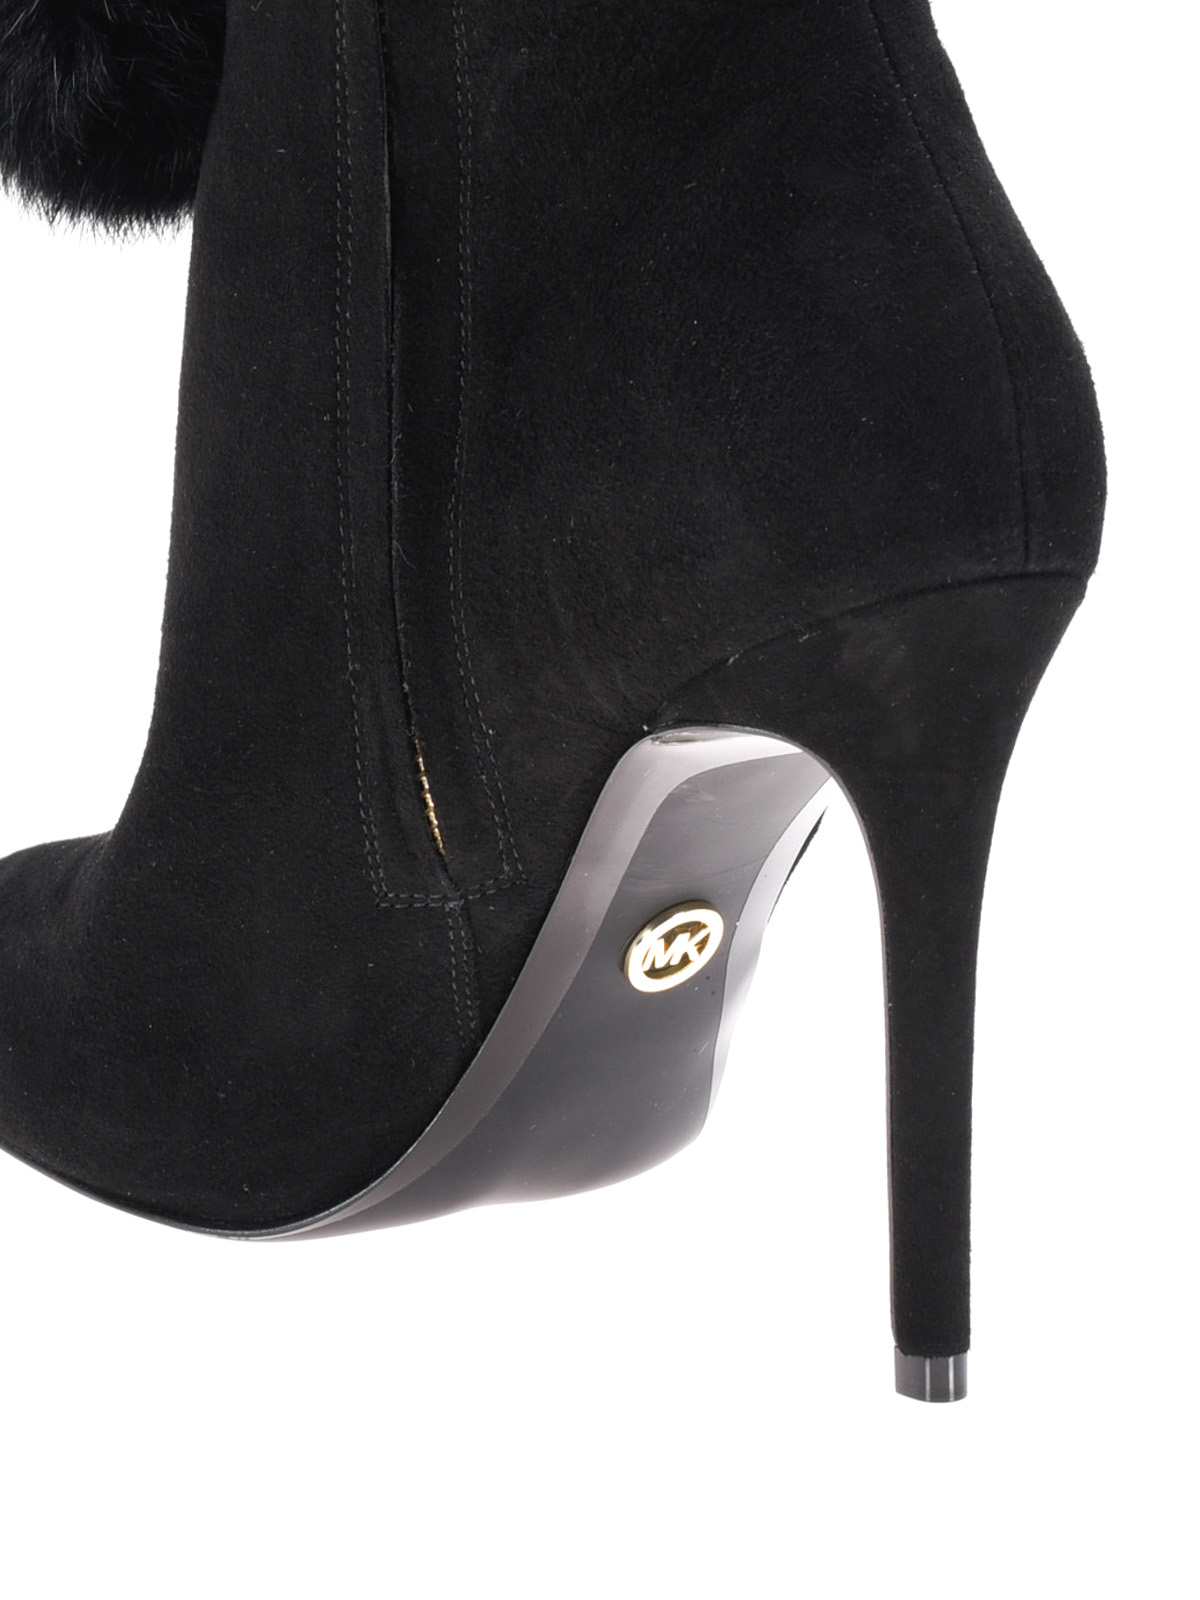 Ankle boots Michael Kors - Remi fur detail black suede booties -  40F7REHE5S001